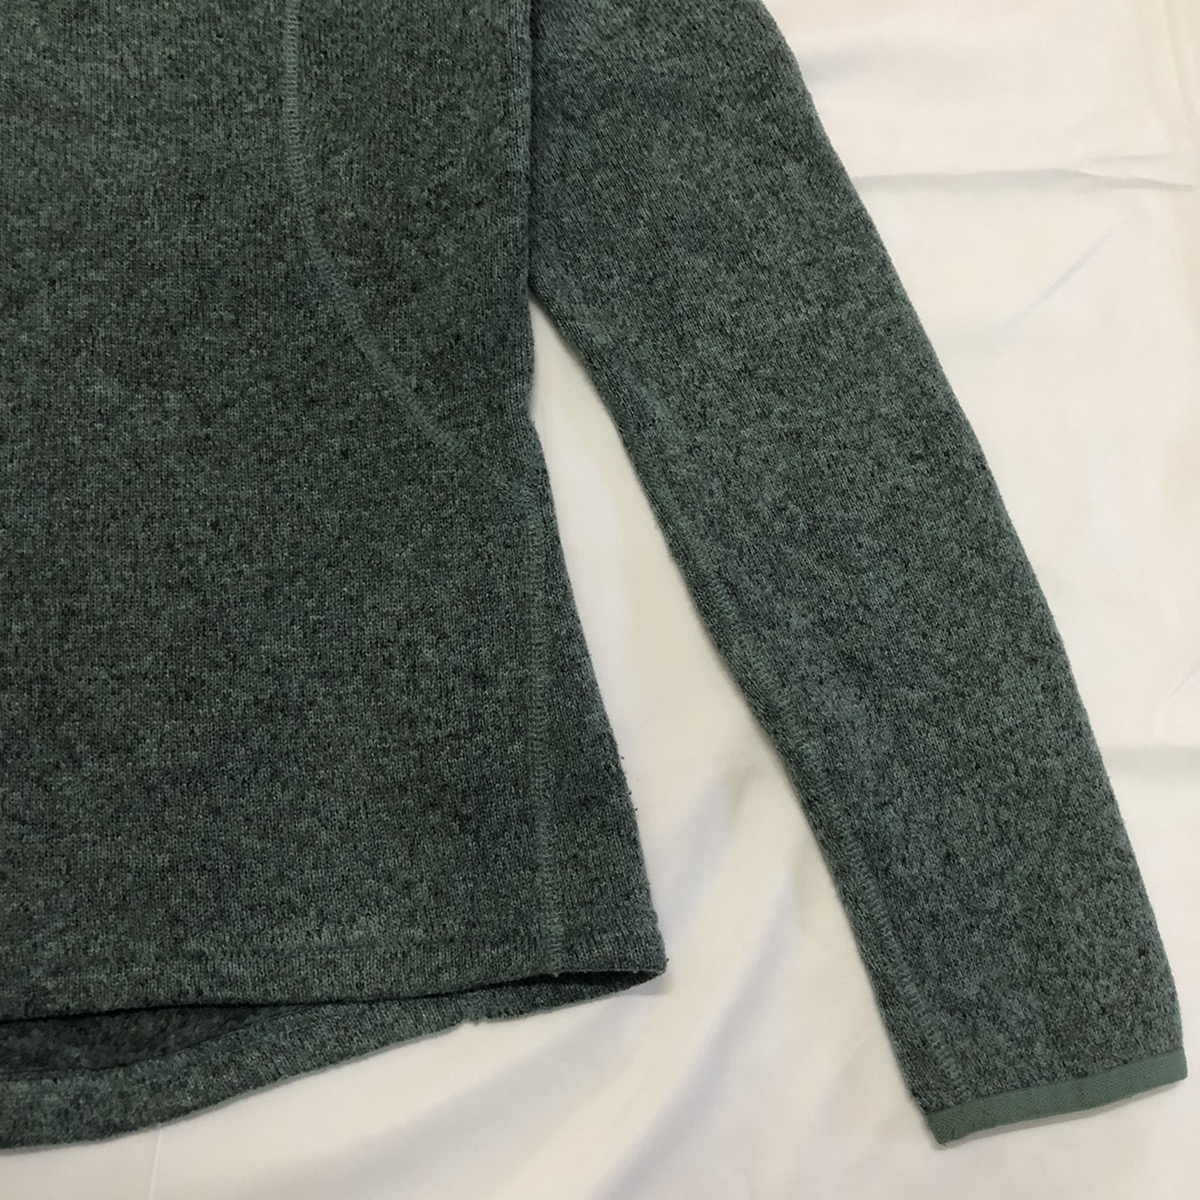 The North Face sweater fleece 1/4 toggle button - 3